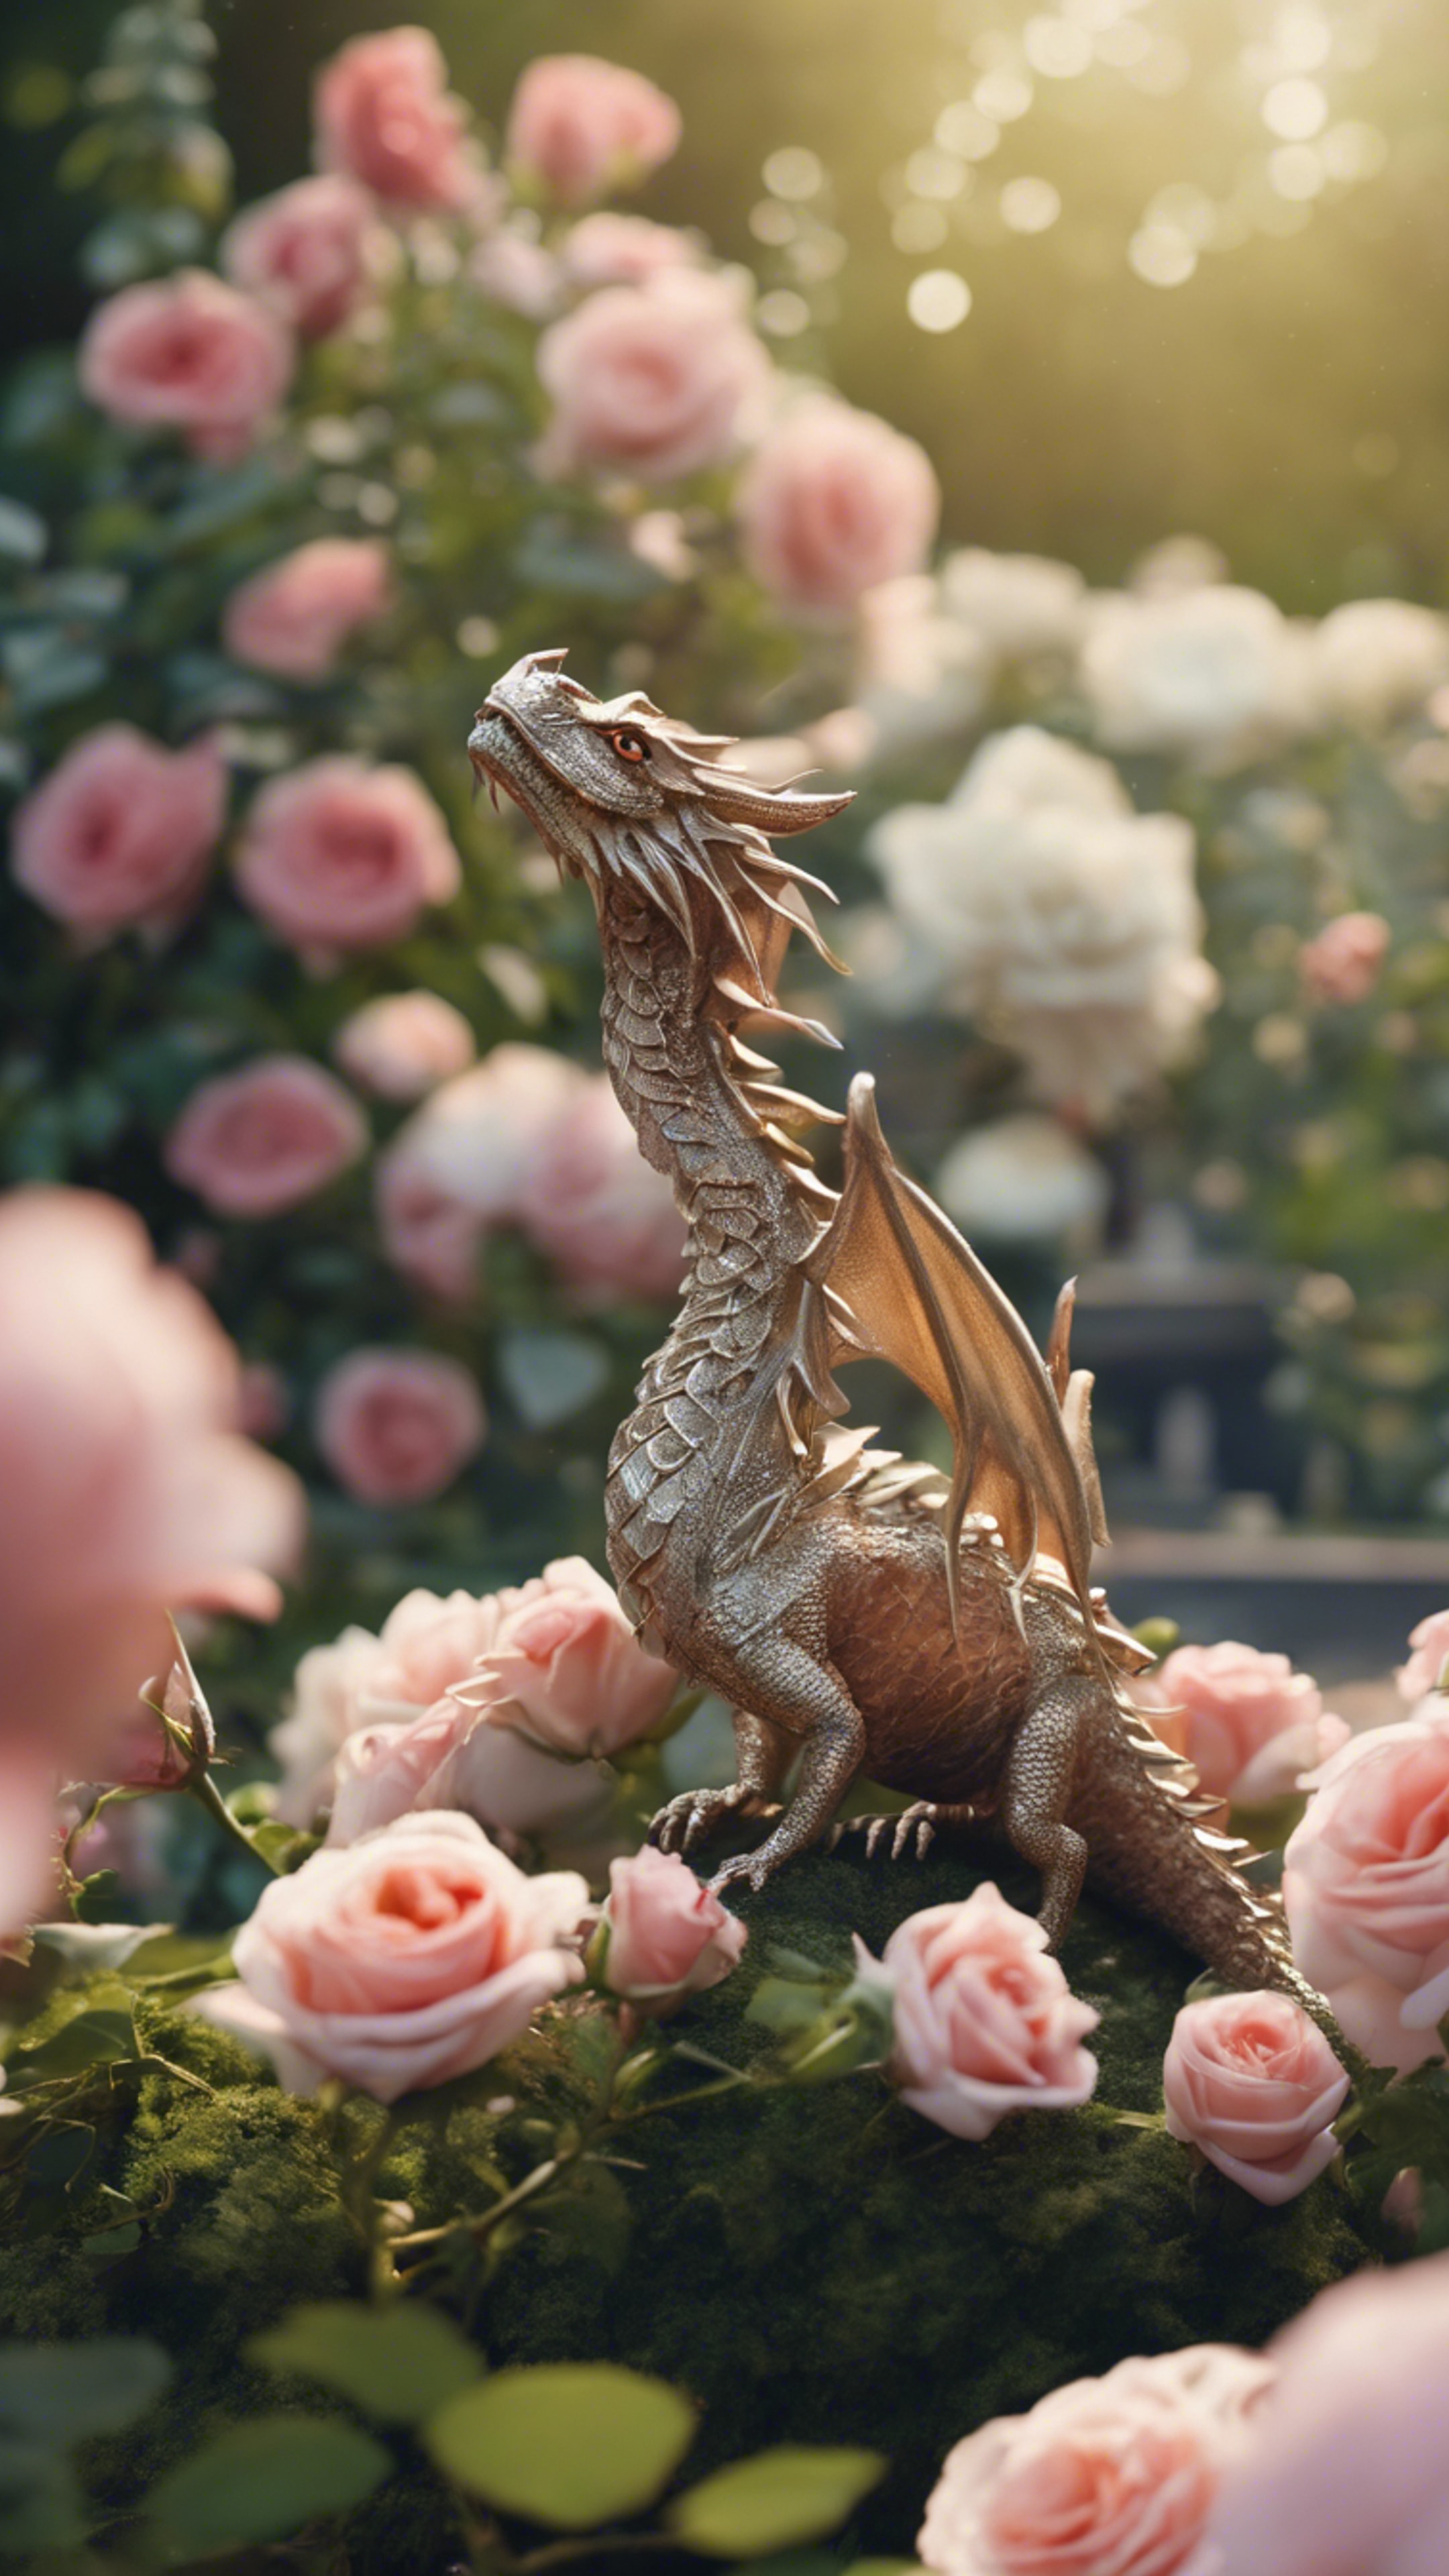 A peaceful garden scene with a tiny, delicate dragon hovering over blooming roses. Hintergrund[938d180fa7284dedb4af]